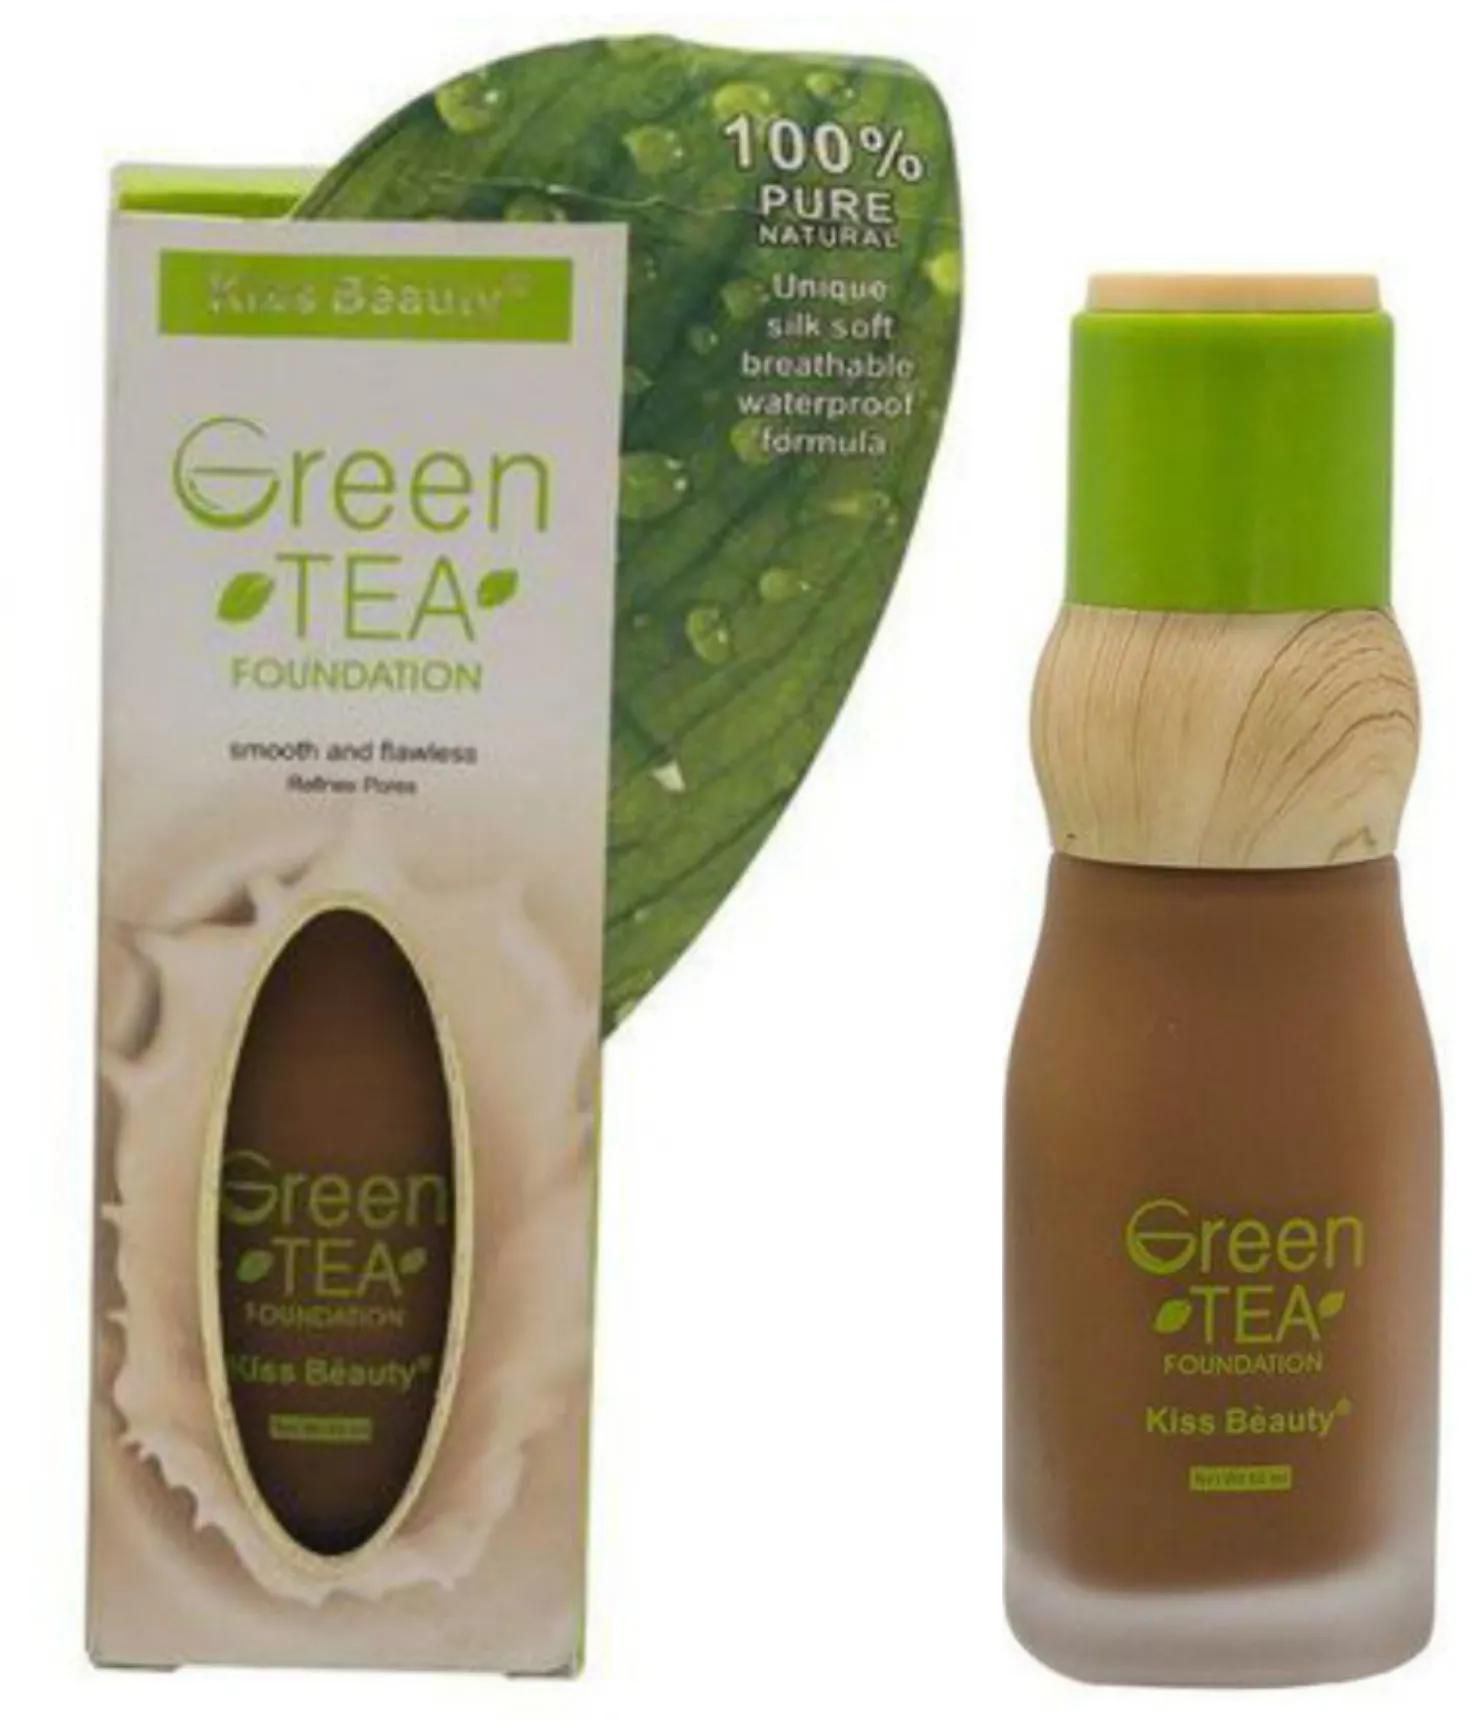 Kiss Beauty Green Tea Foundation Smooth & Flawless Refines Pores Coverage Face Makeup